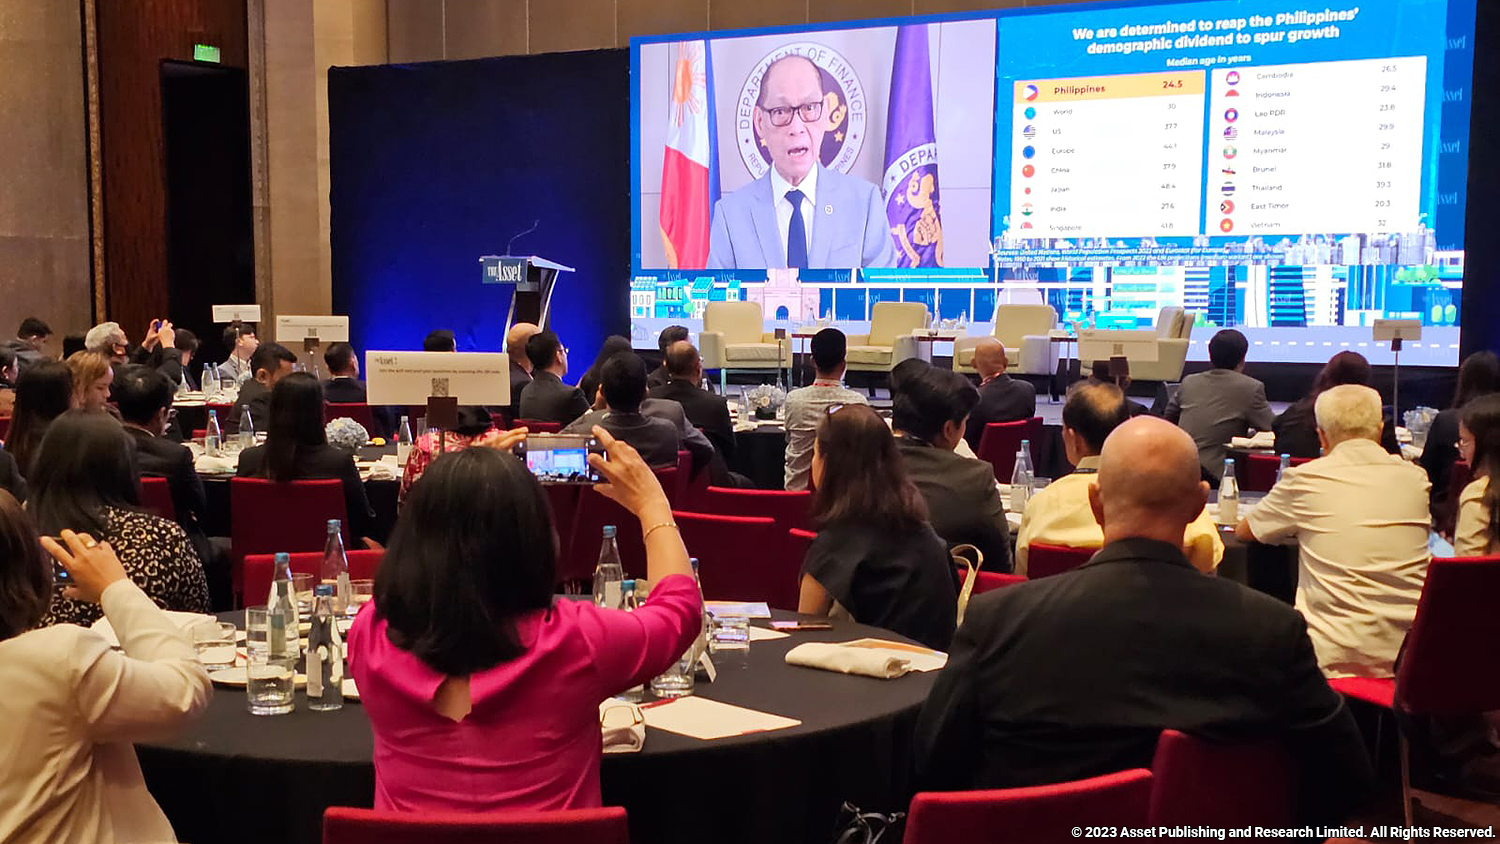 Benjamin Diokno secretary, department of finance, Republic of the Philippines making his virtual keynote address at our summit 